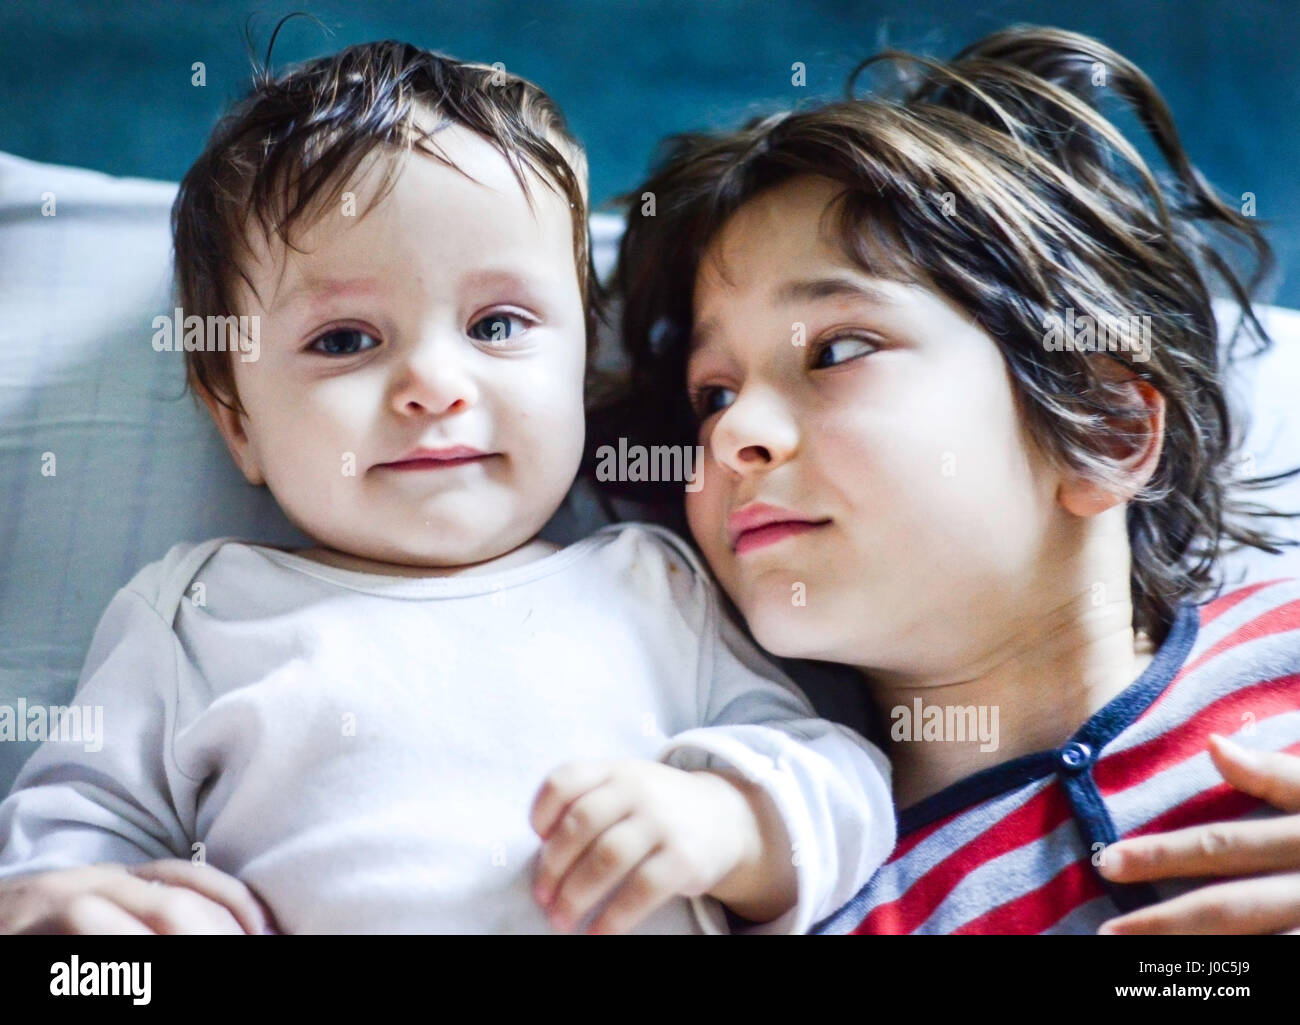 Portrait of boy lying in bed looking sideways at baby brother Stock Photo